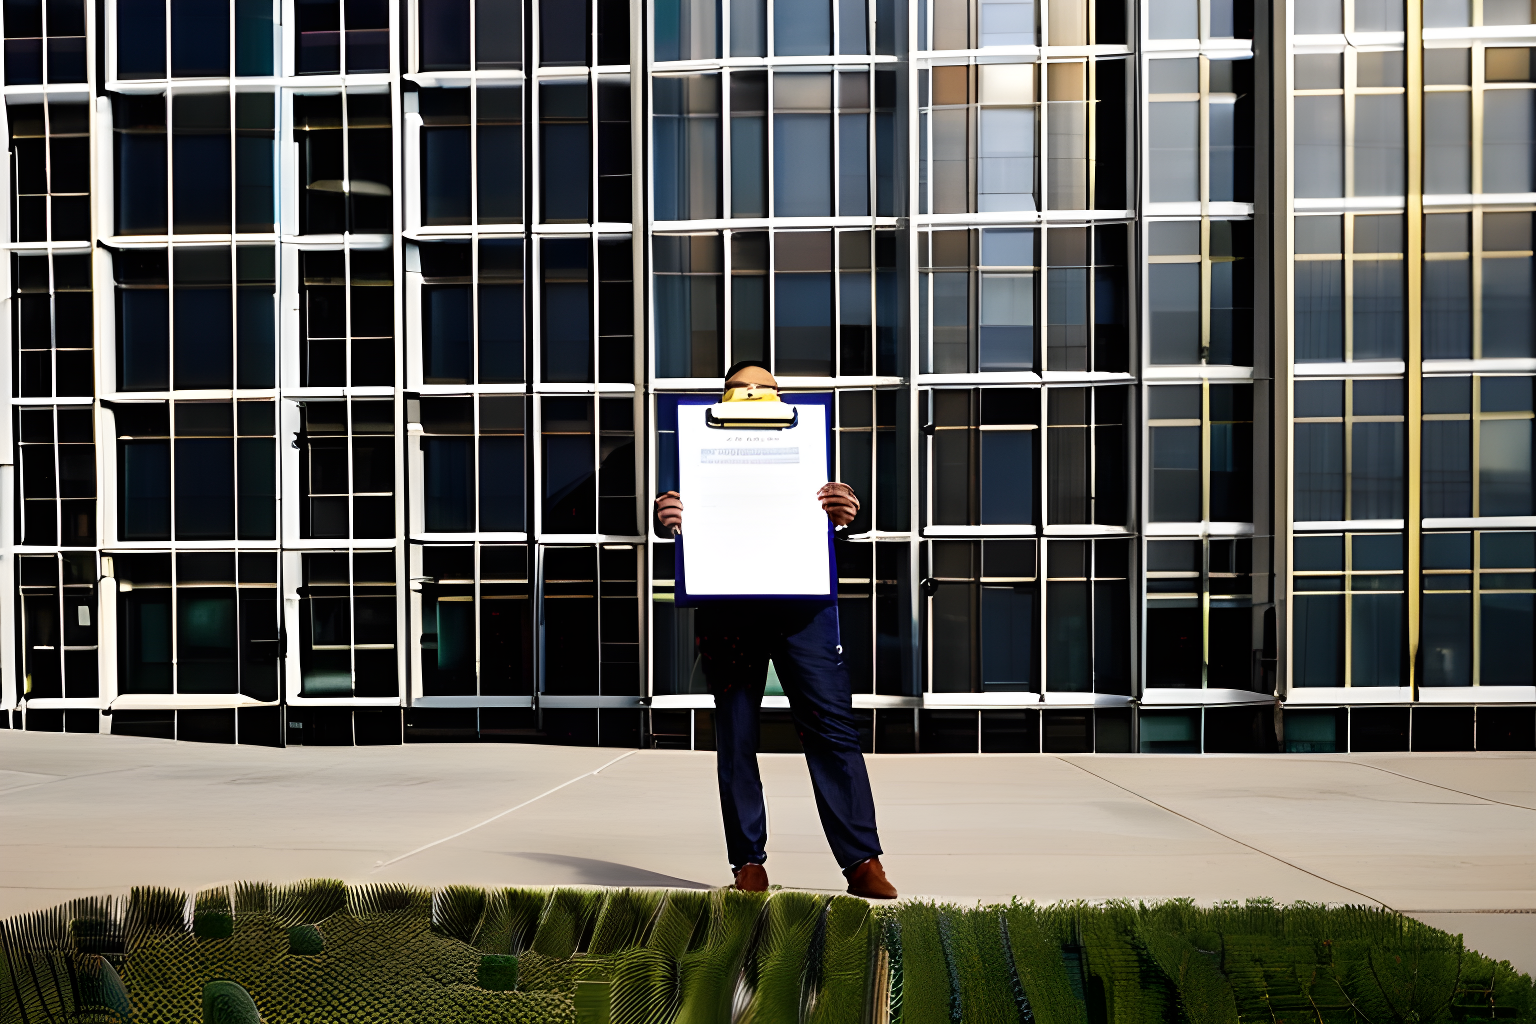 a man in front of apple inc.'s head quarters with a sheet of paper titled "search warrant"